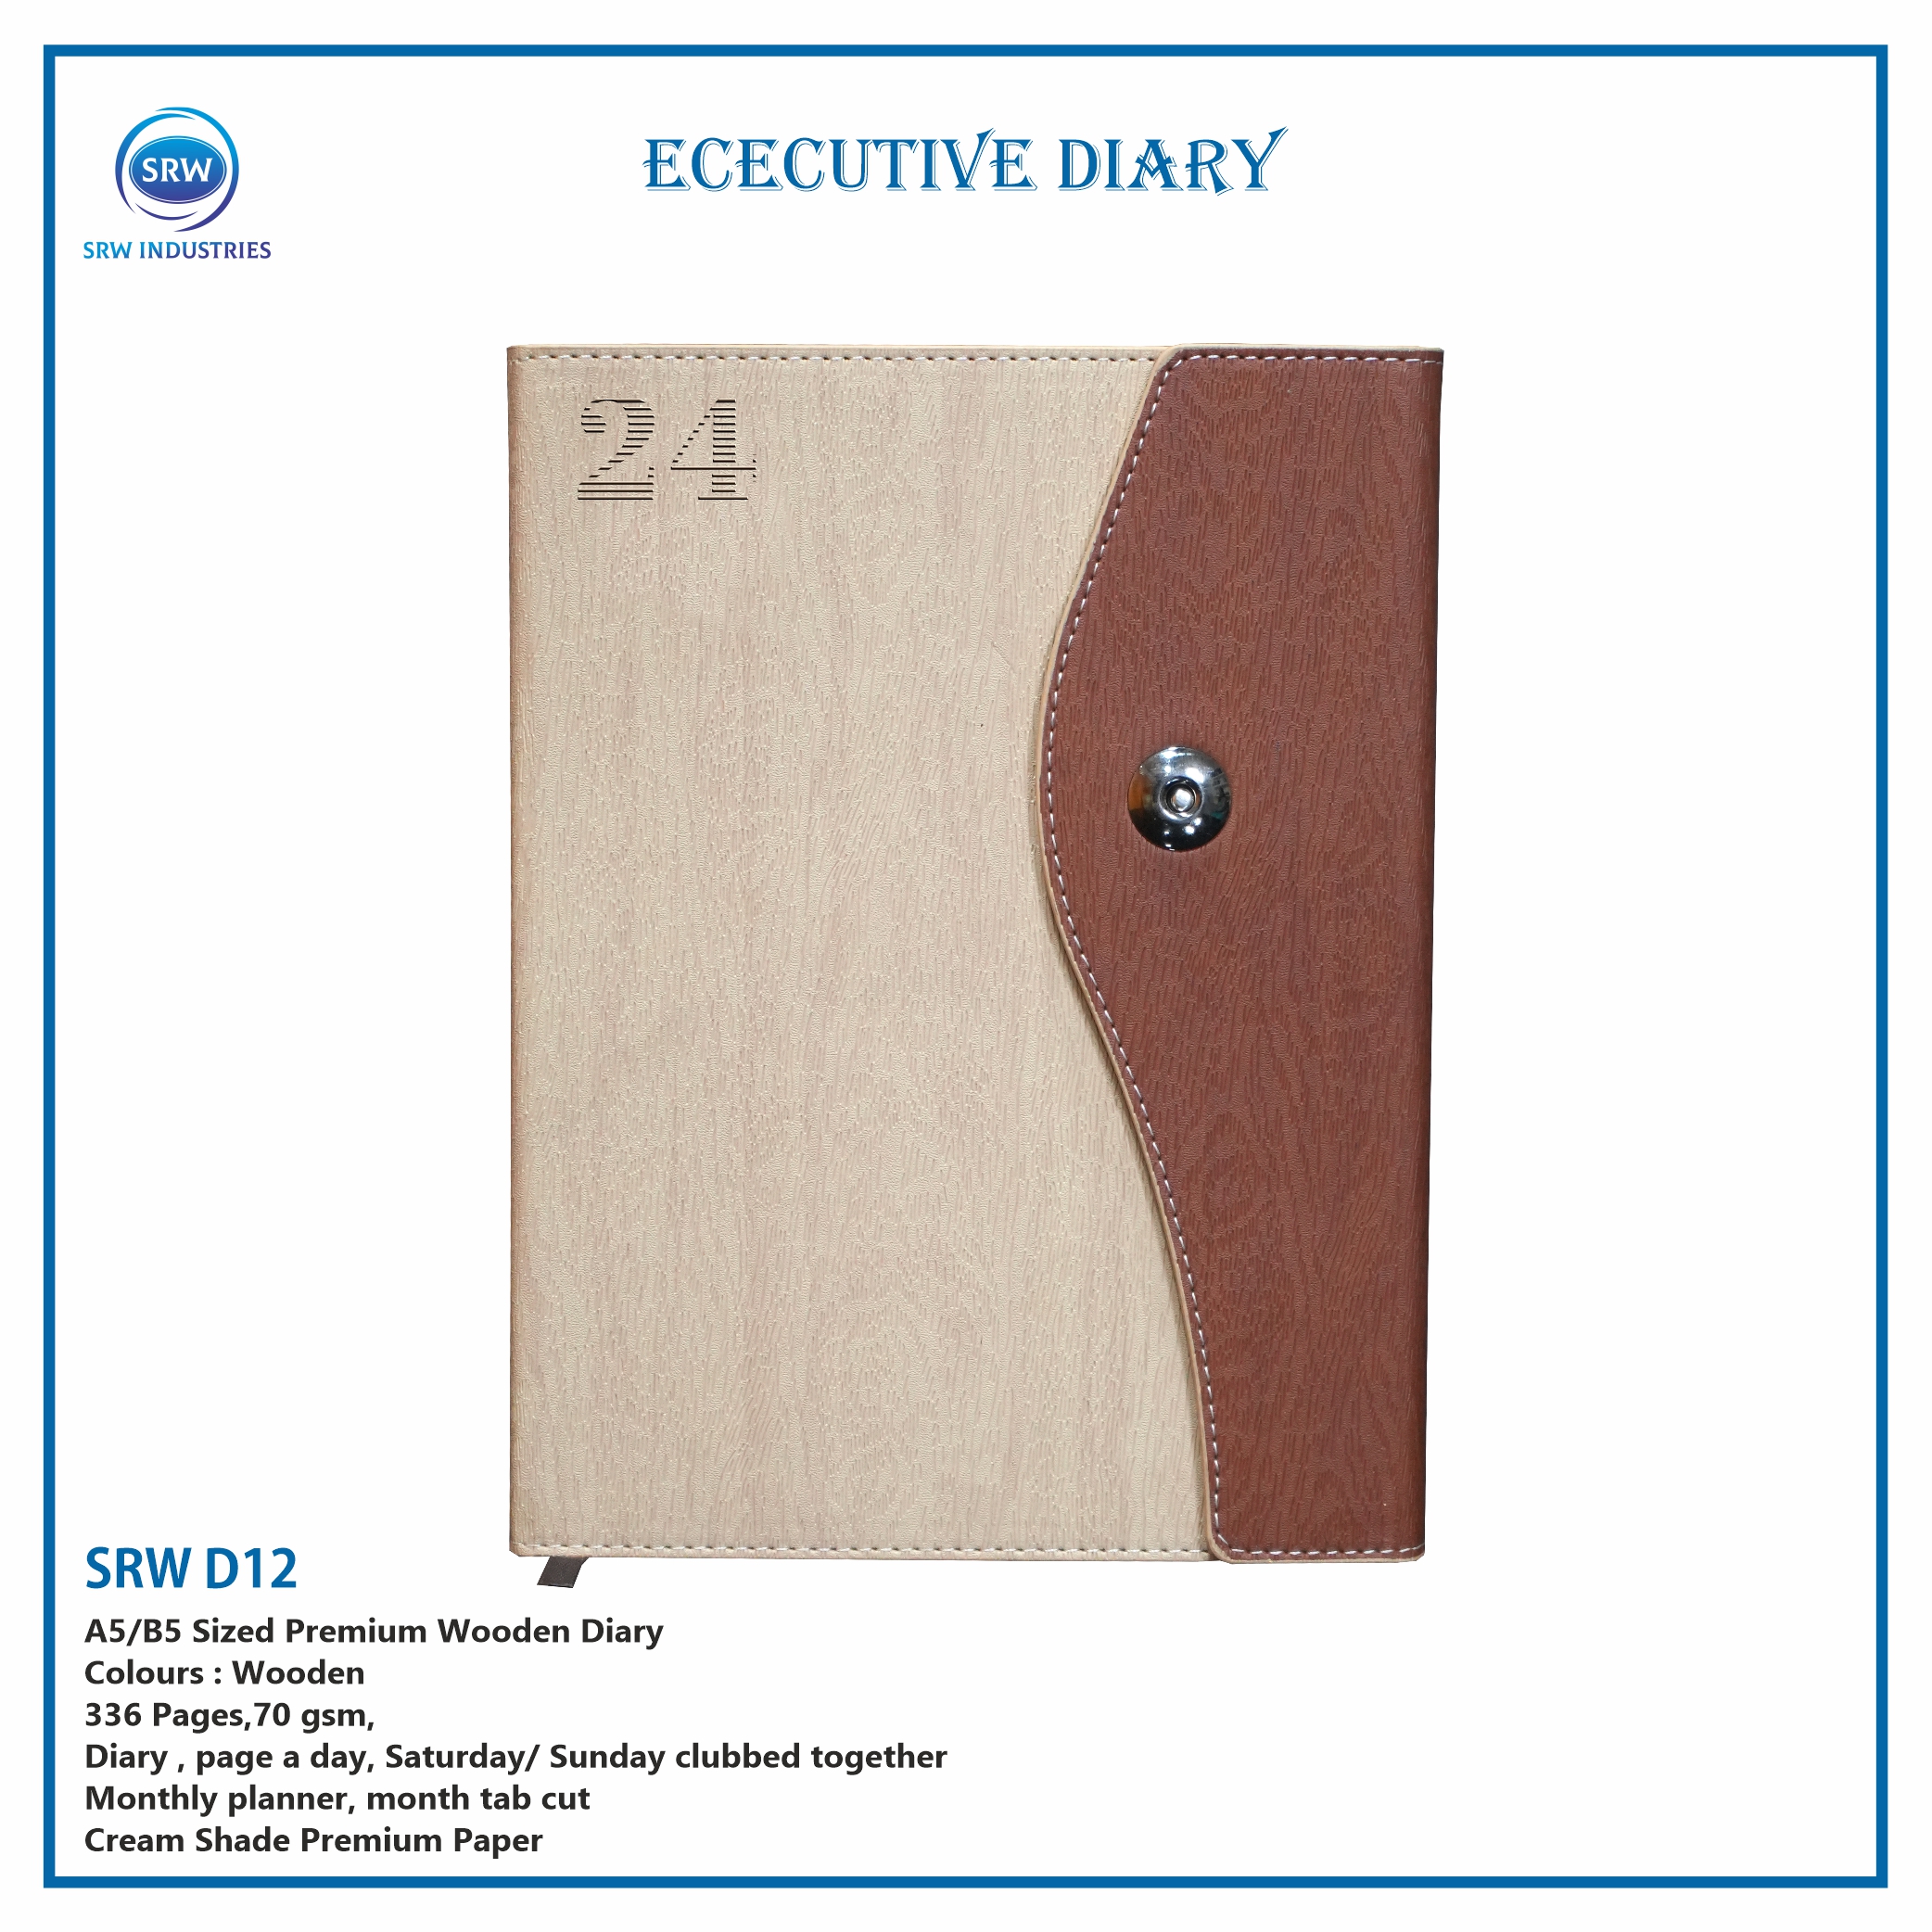 Executive Diary Manufacturers in Pune